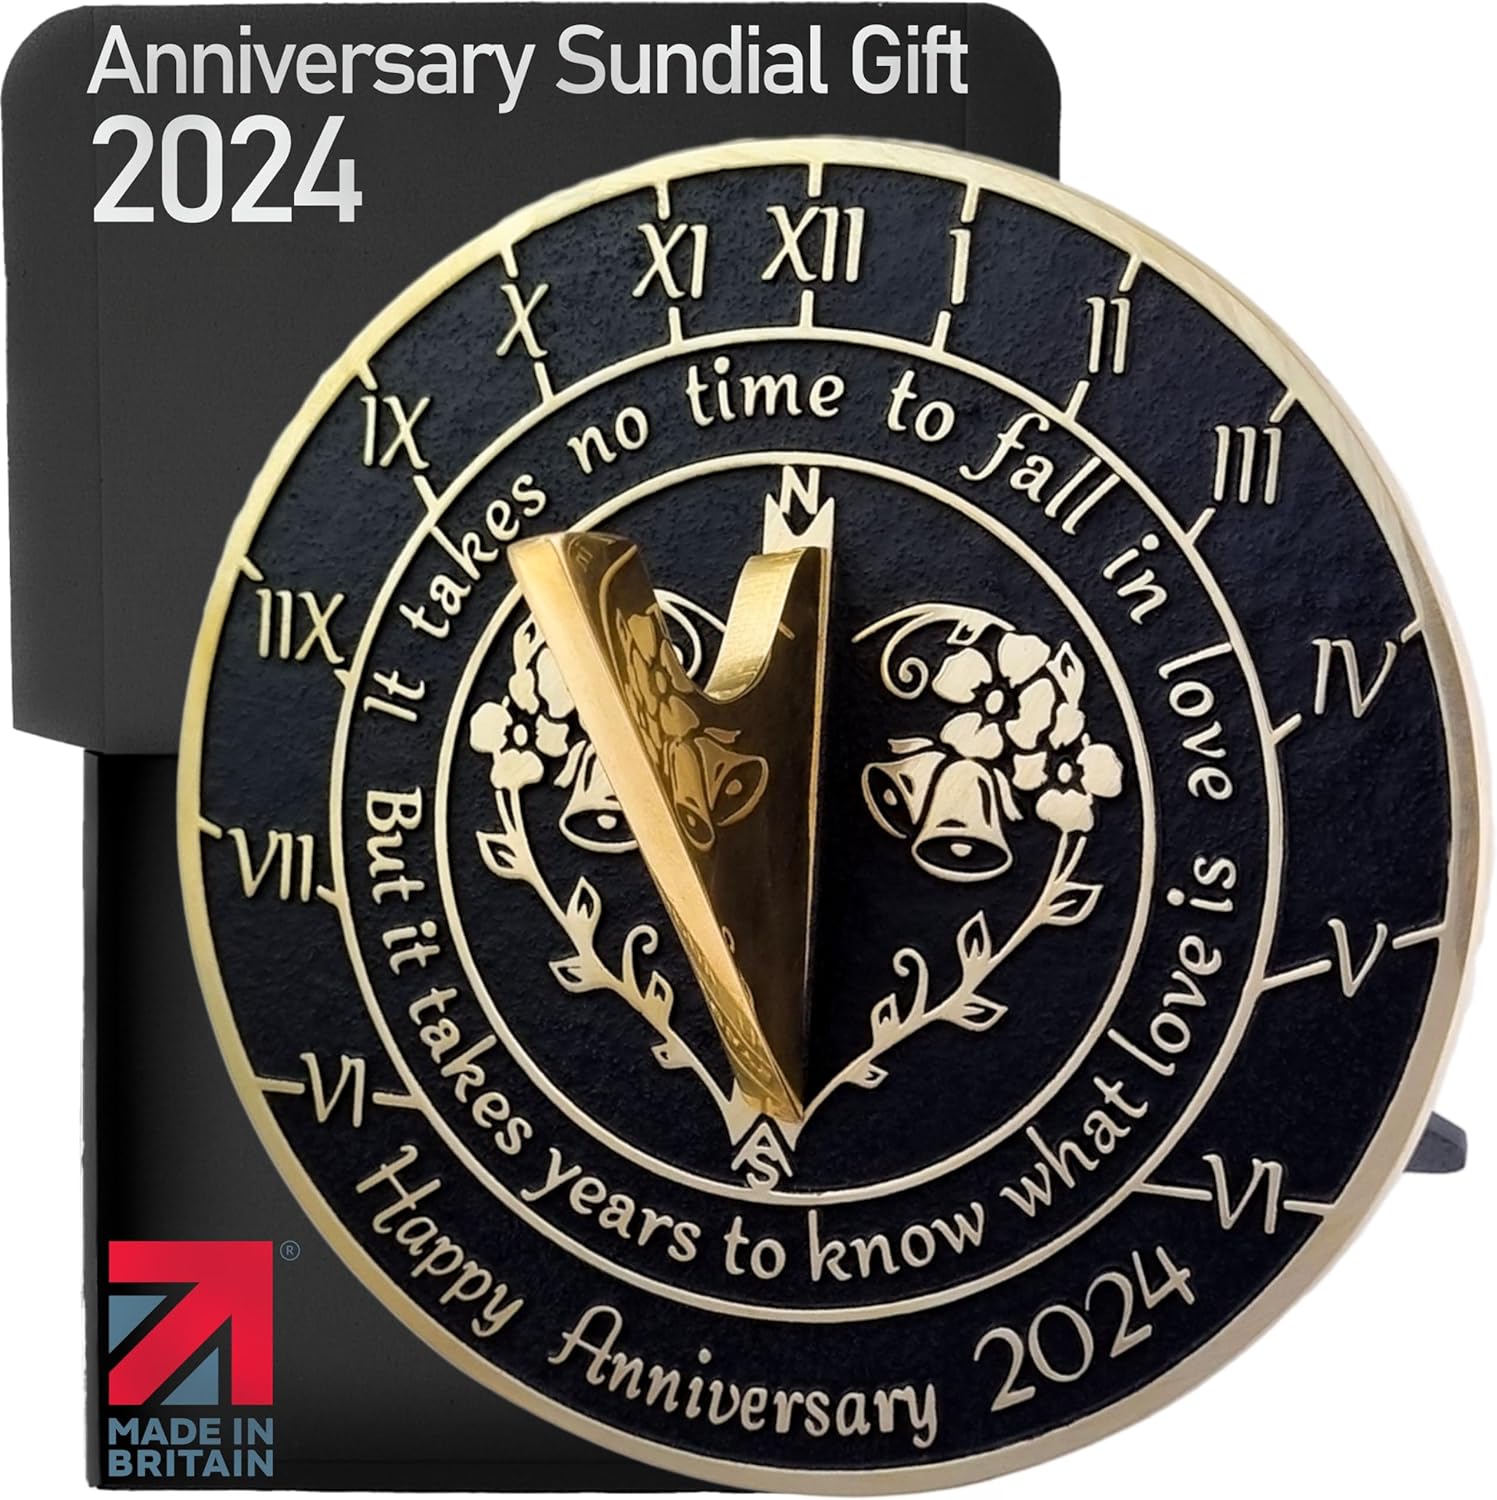 Anniversary Sundial Gift for Any Wedding Anniversary in 2024 - What Love is - Recycled Metal Home Decor Or Garden Present Idea - Handmade in UK for Him, Her Parents Or Couples Celebration